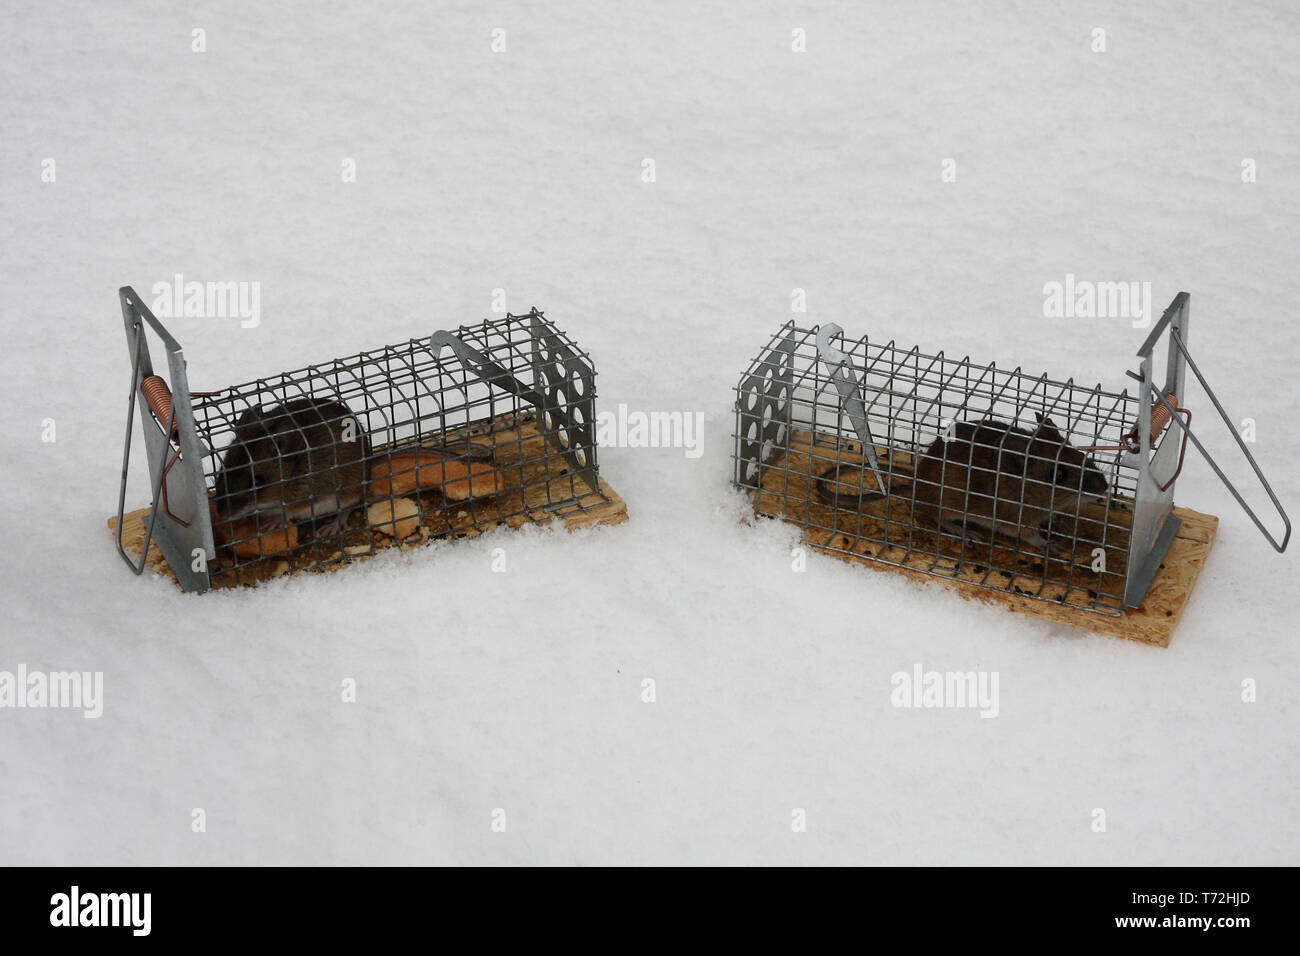 Mouse Released From Humane Mouse Trap Stock Photo - Download Image Now -  Mousetrap, Agricultural Field, Animal - iStock